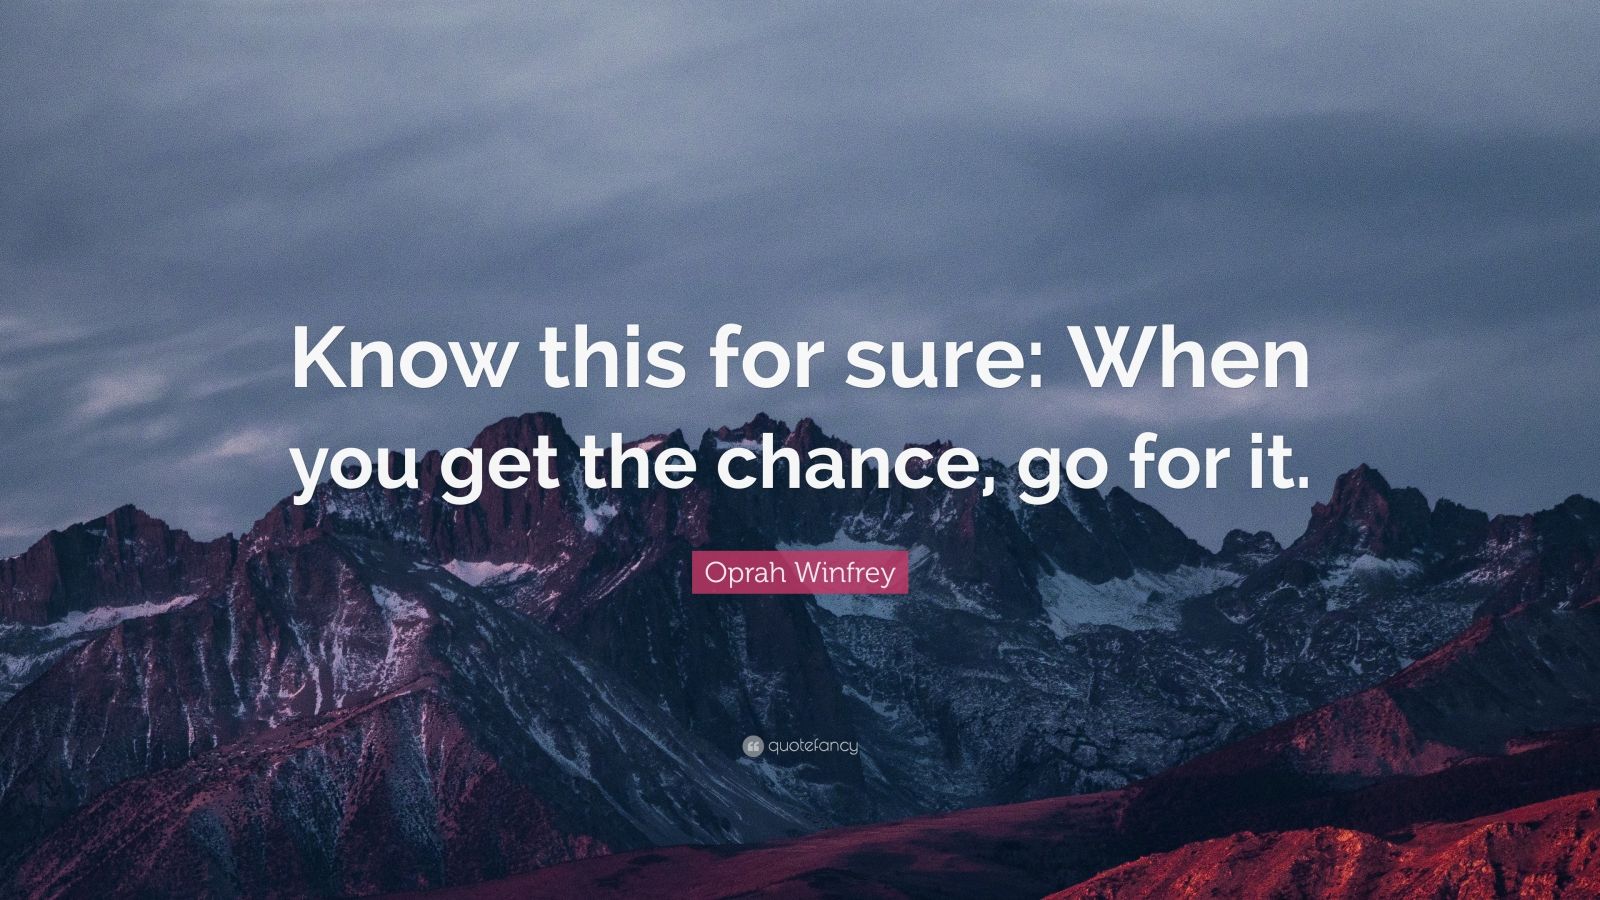 Oprah Winfrey Quote: “Know this for sure: When you get the chance, go ...